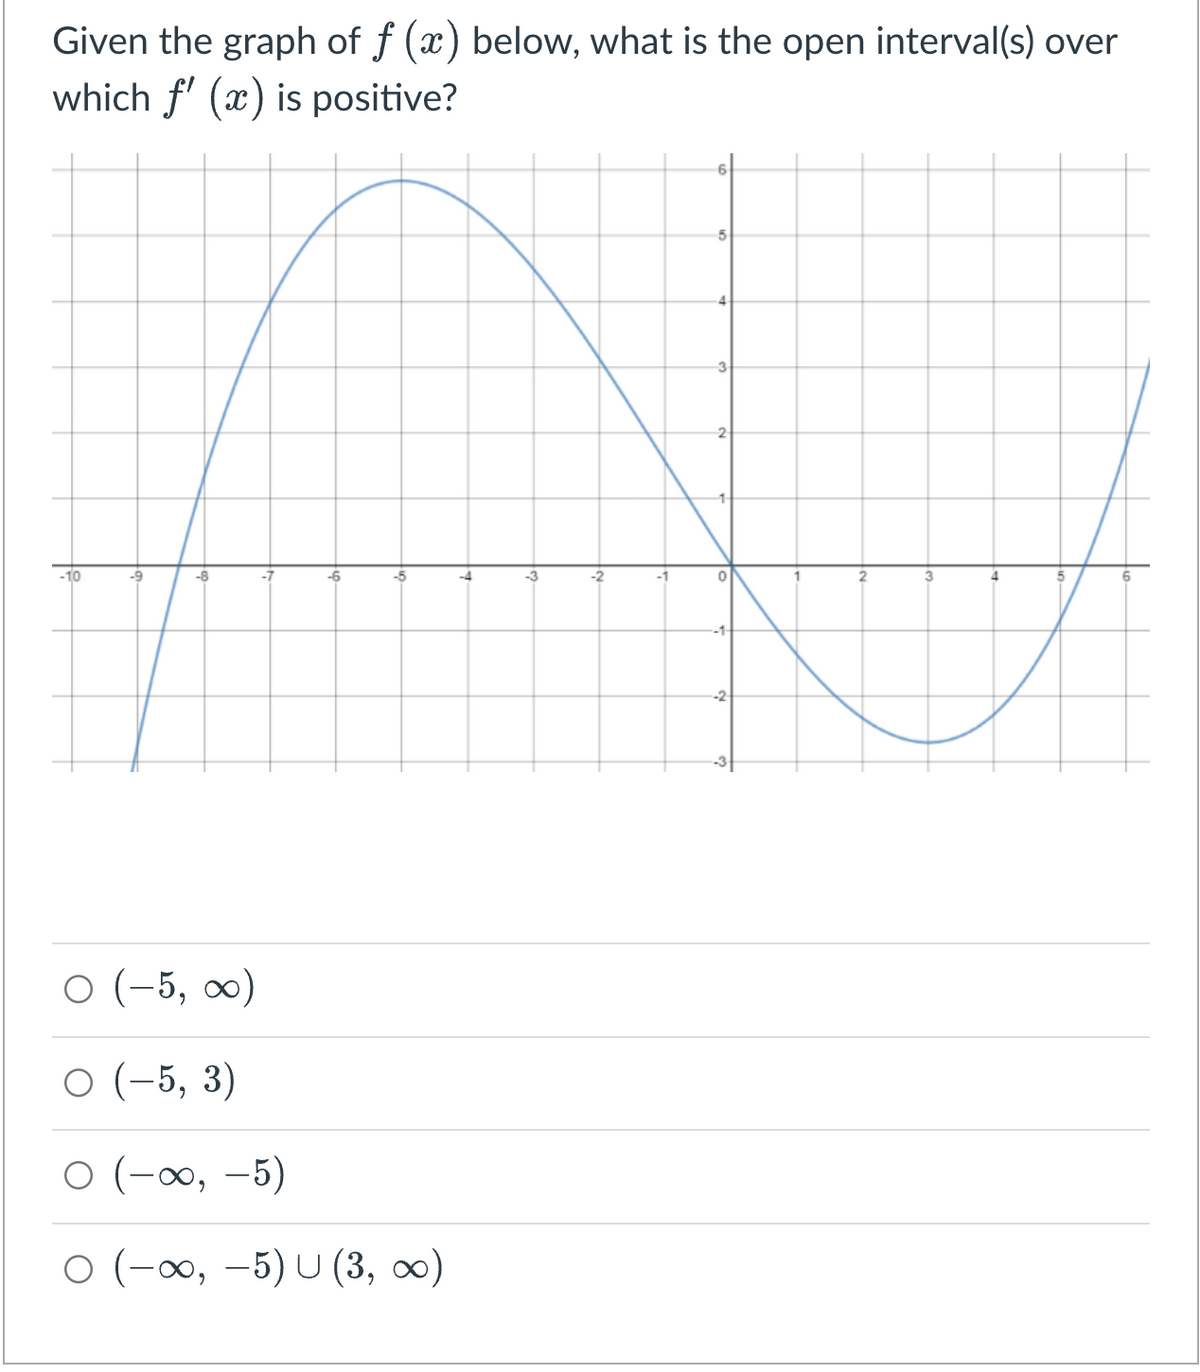 Given the graph of f (x) below, what is the open interval(s) over
which f'(x) is positive?
-10
-9
-8
-7
-6
-5
0 (-5, ∞0)
O (-5, 3)
0 (-∞, -5)
O (-∞, -5) U (3, ∞)
-3
-2
5
3
2
0
-2
3
6